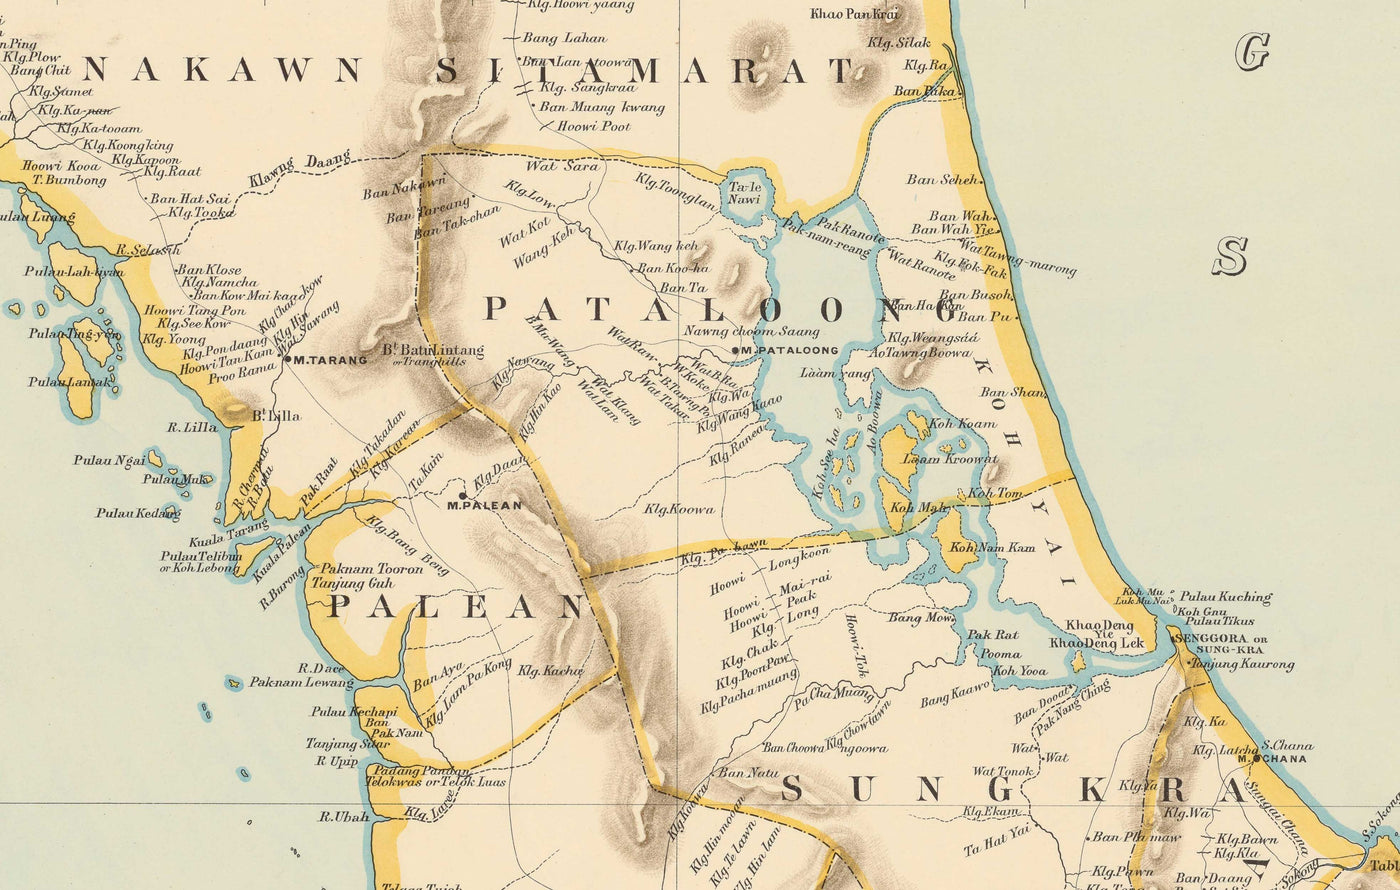 Old Map of the Malay Peninsula in 1898 by Cuylenburg & Stanford - Malaysia, Thailand, Singapore, Johor, Malacca